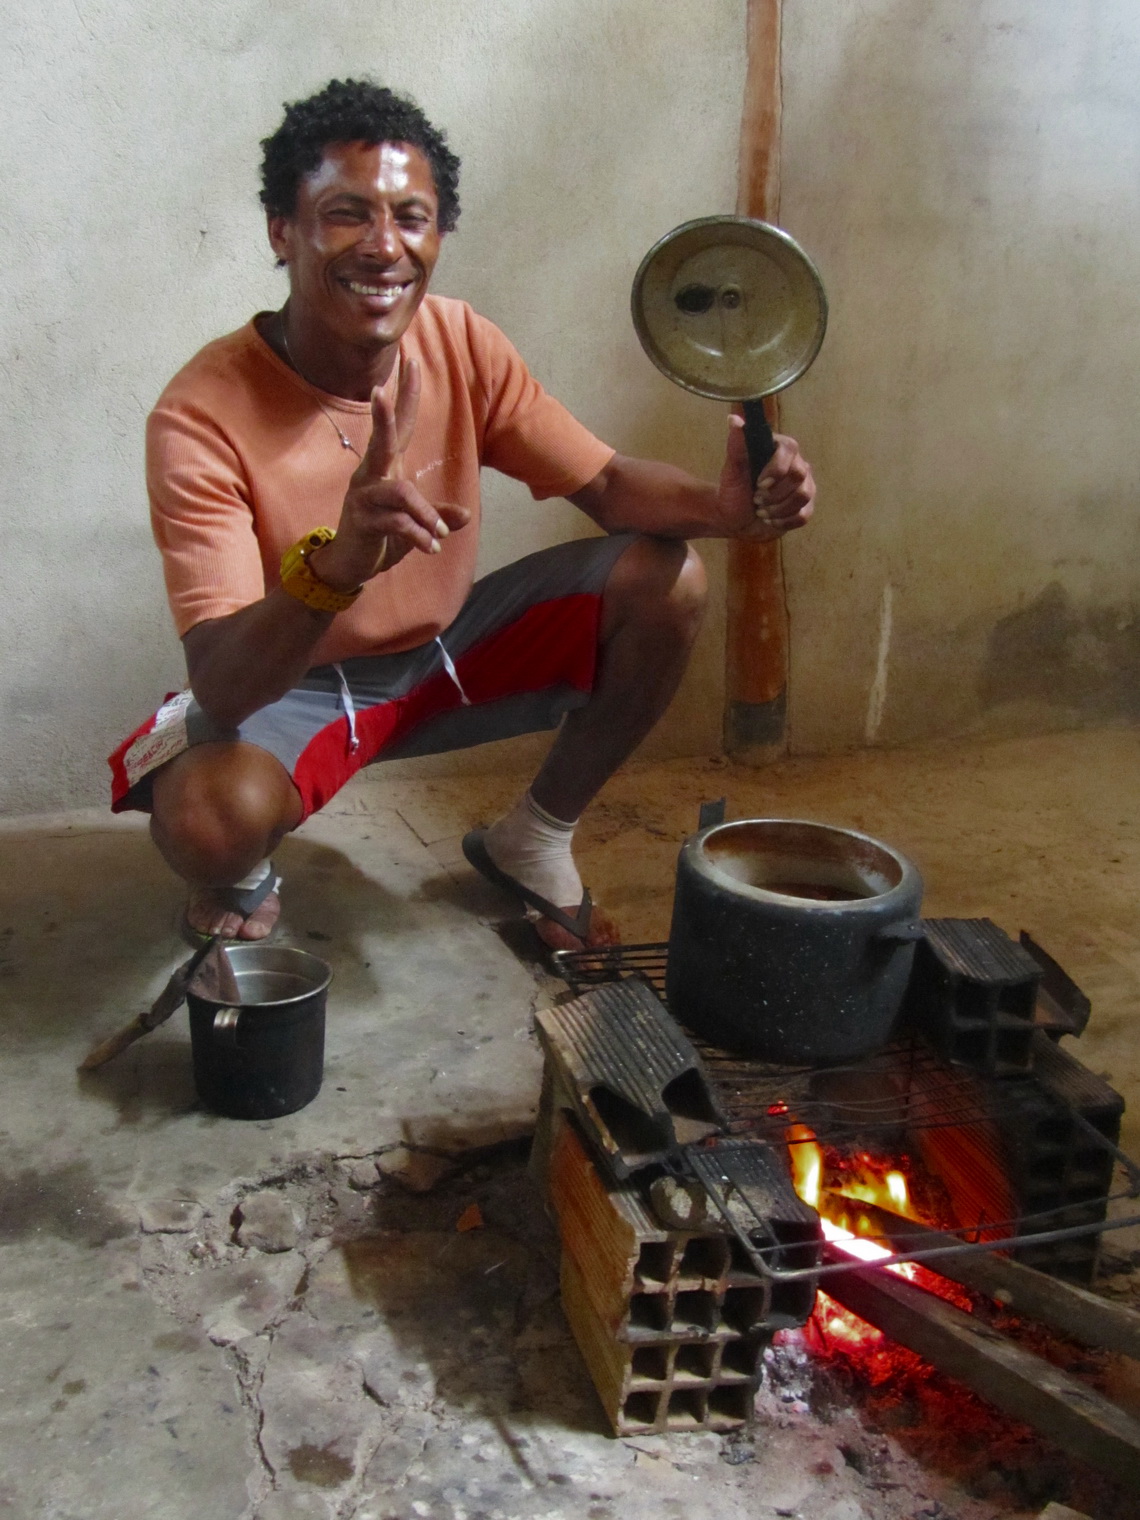 Our proud chef showing the delicious chicken stew on his stove